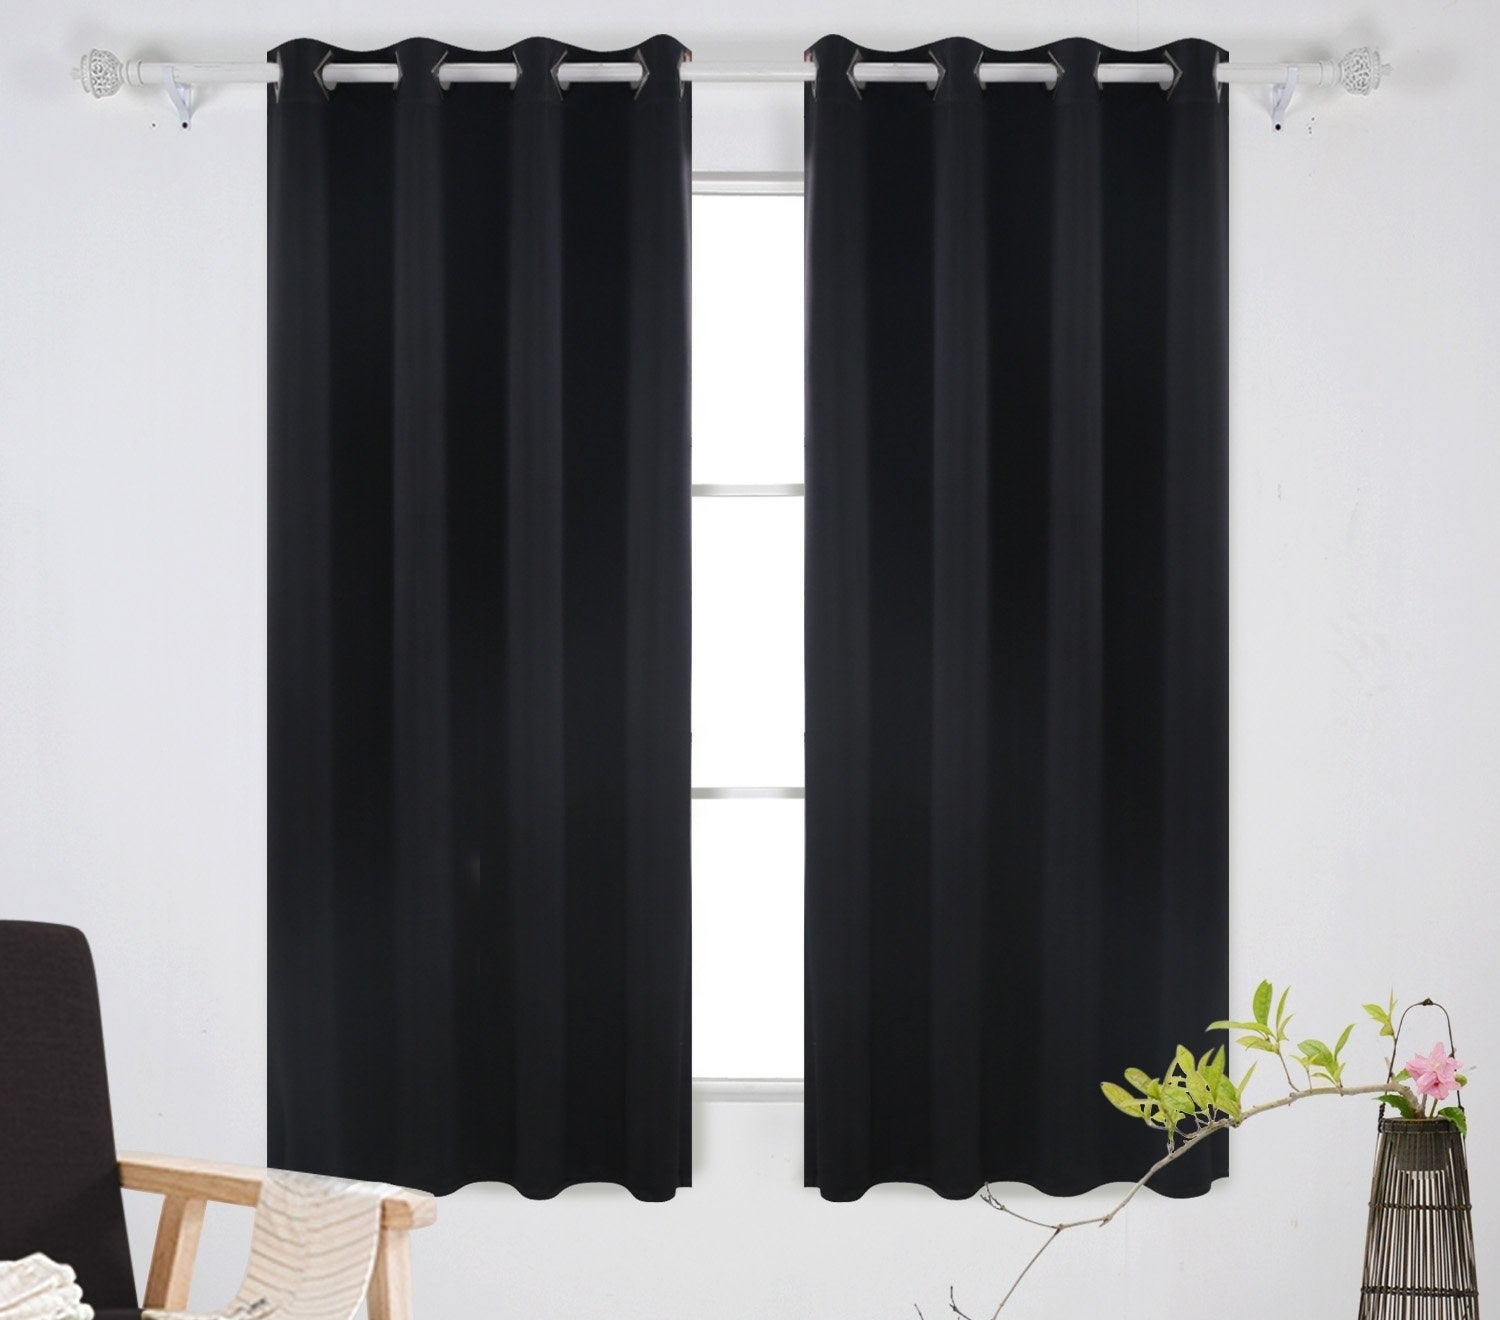 The curtains in black